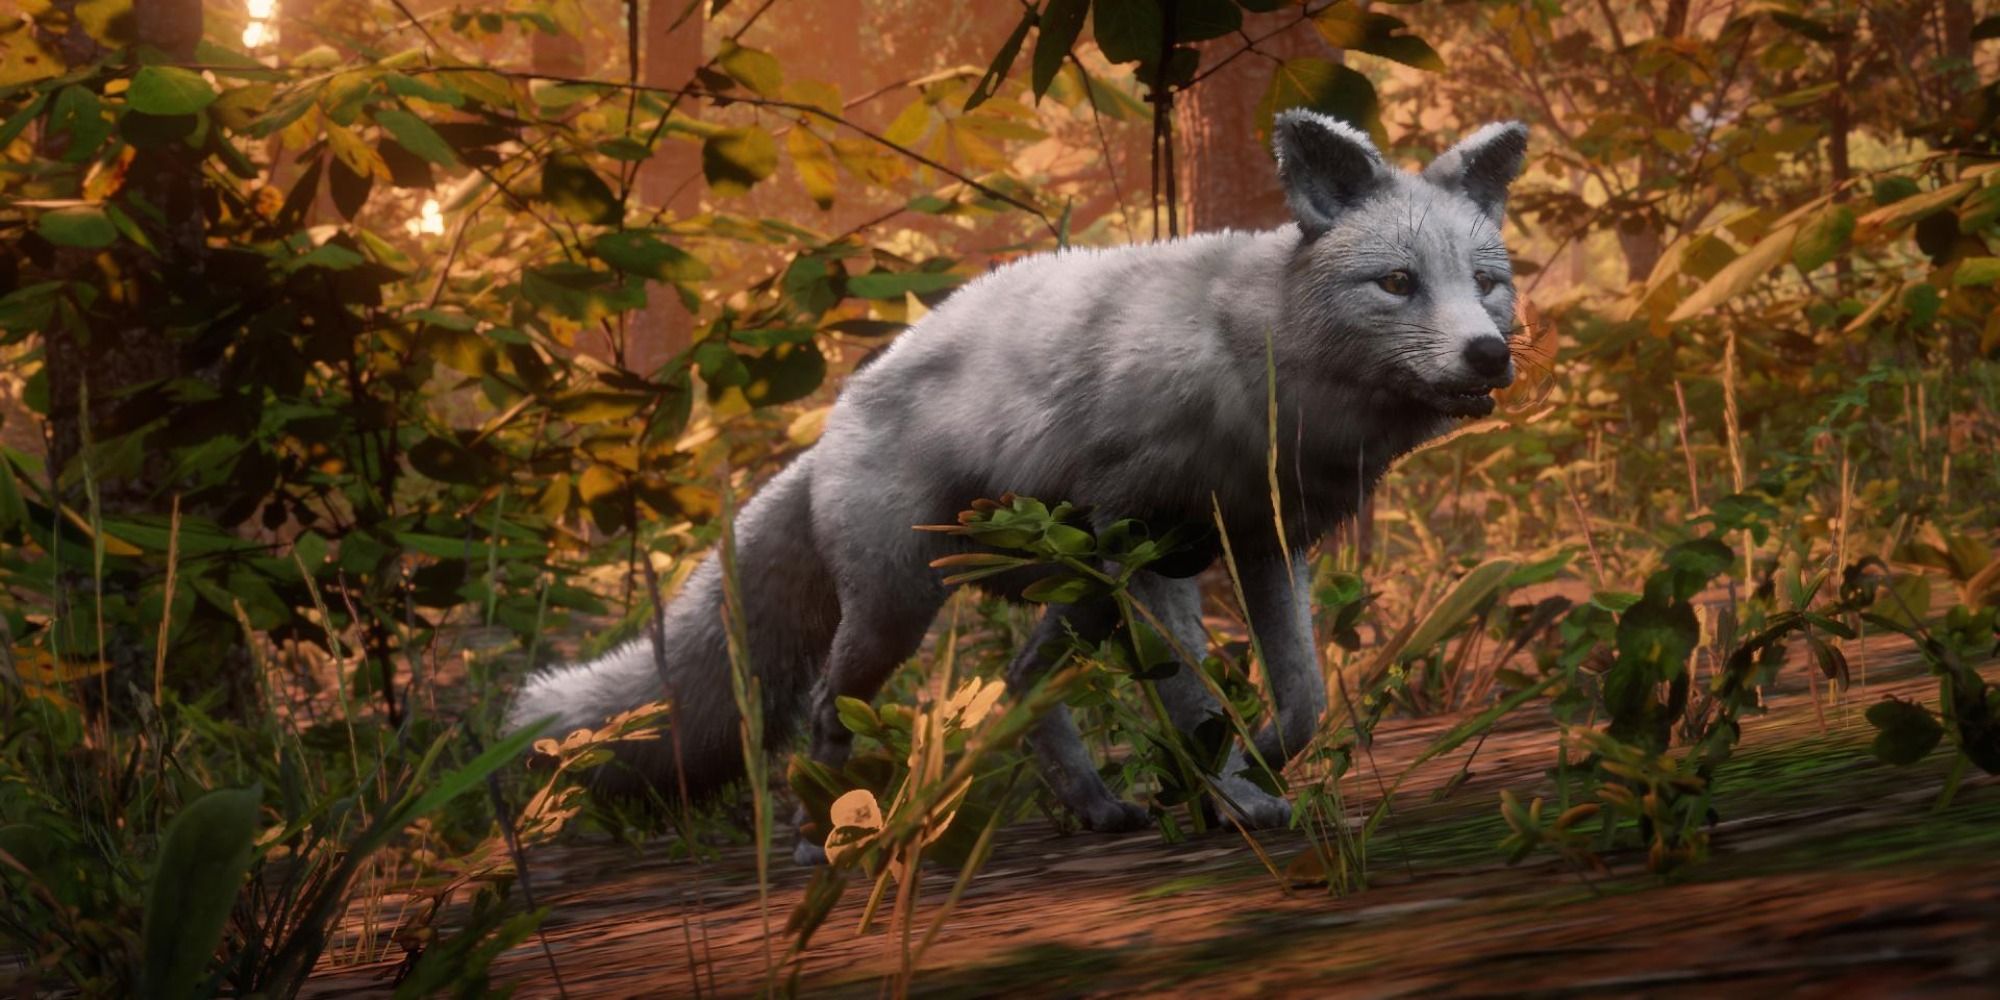 An image of the Silver Fox from Red Dead Redemption 2 running through a forest.